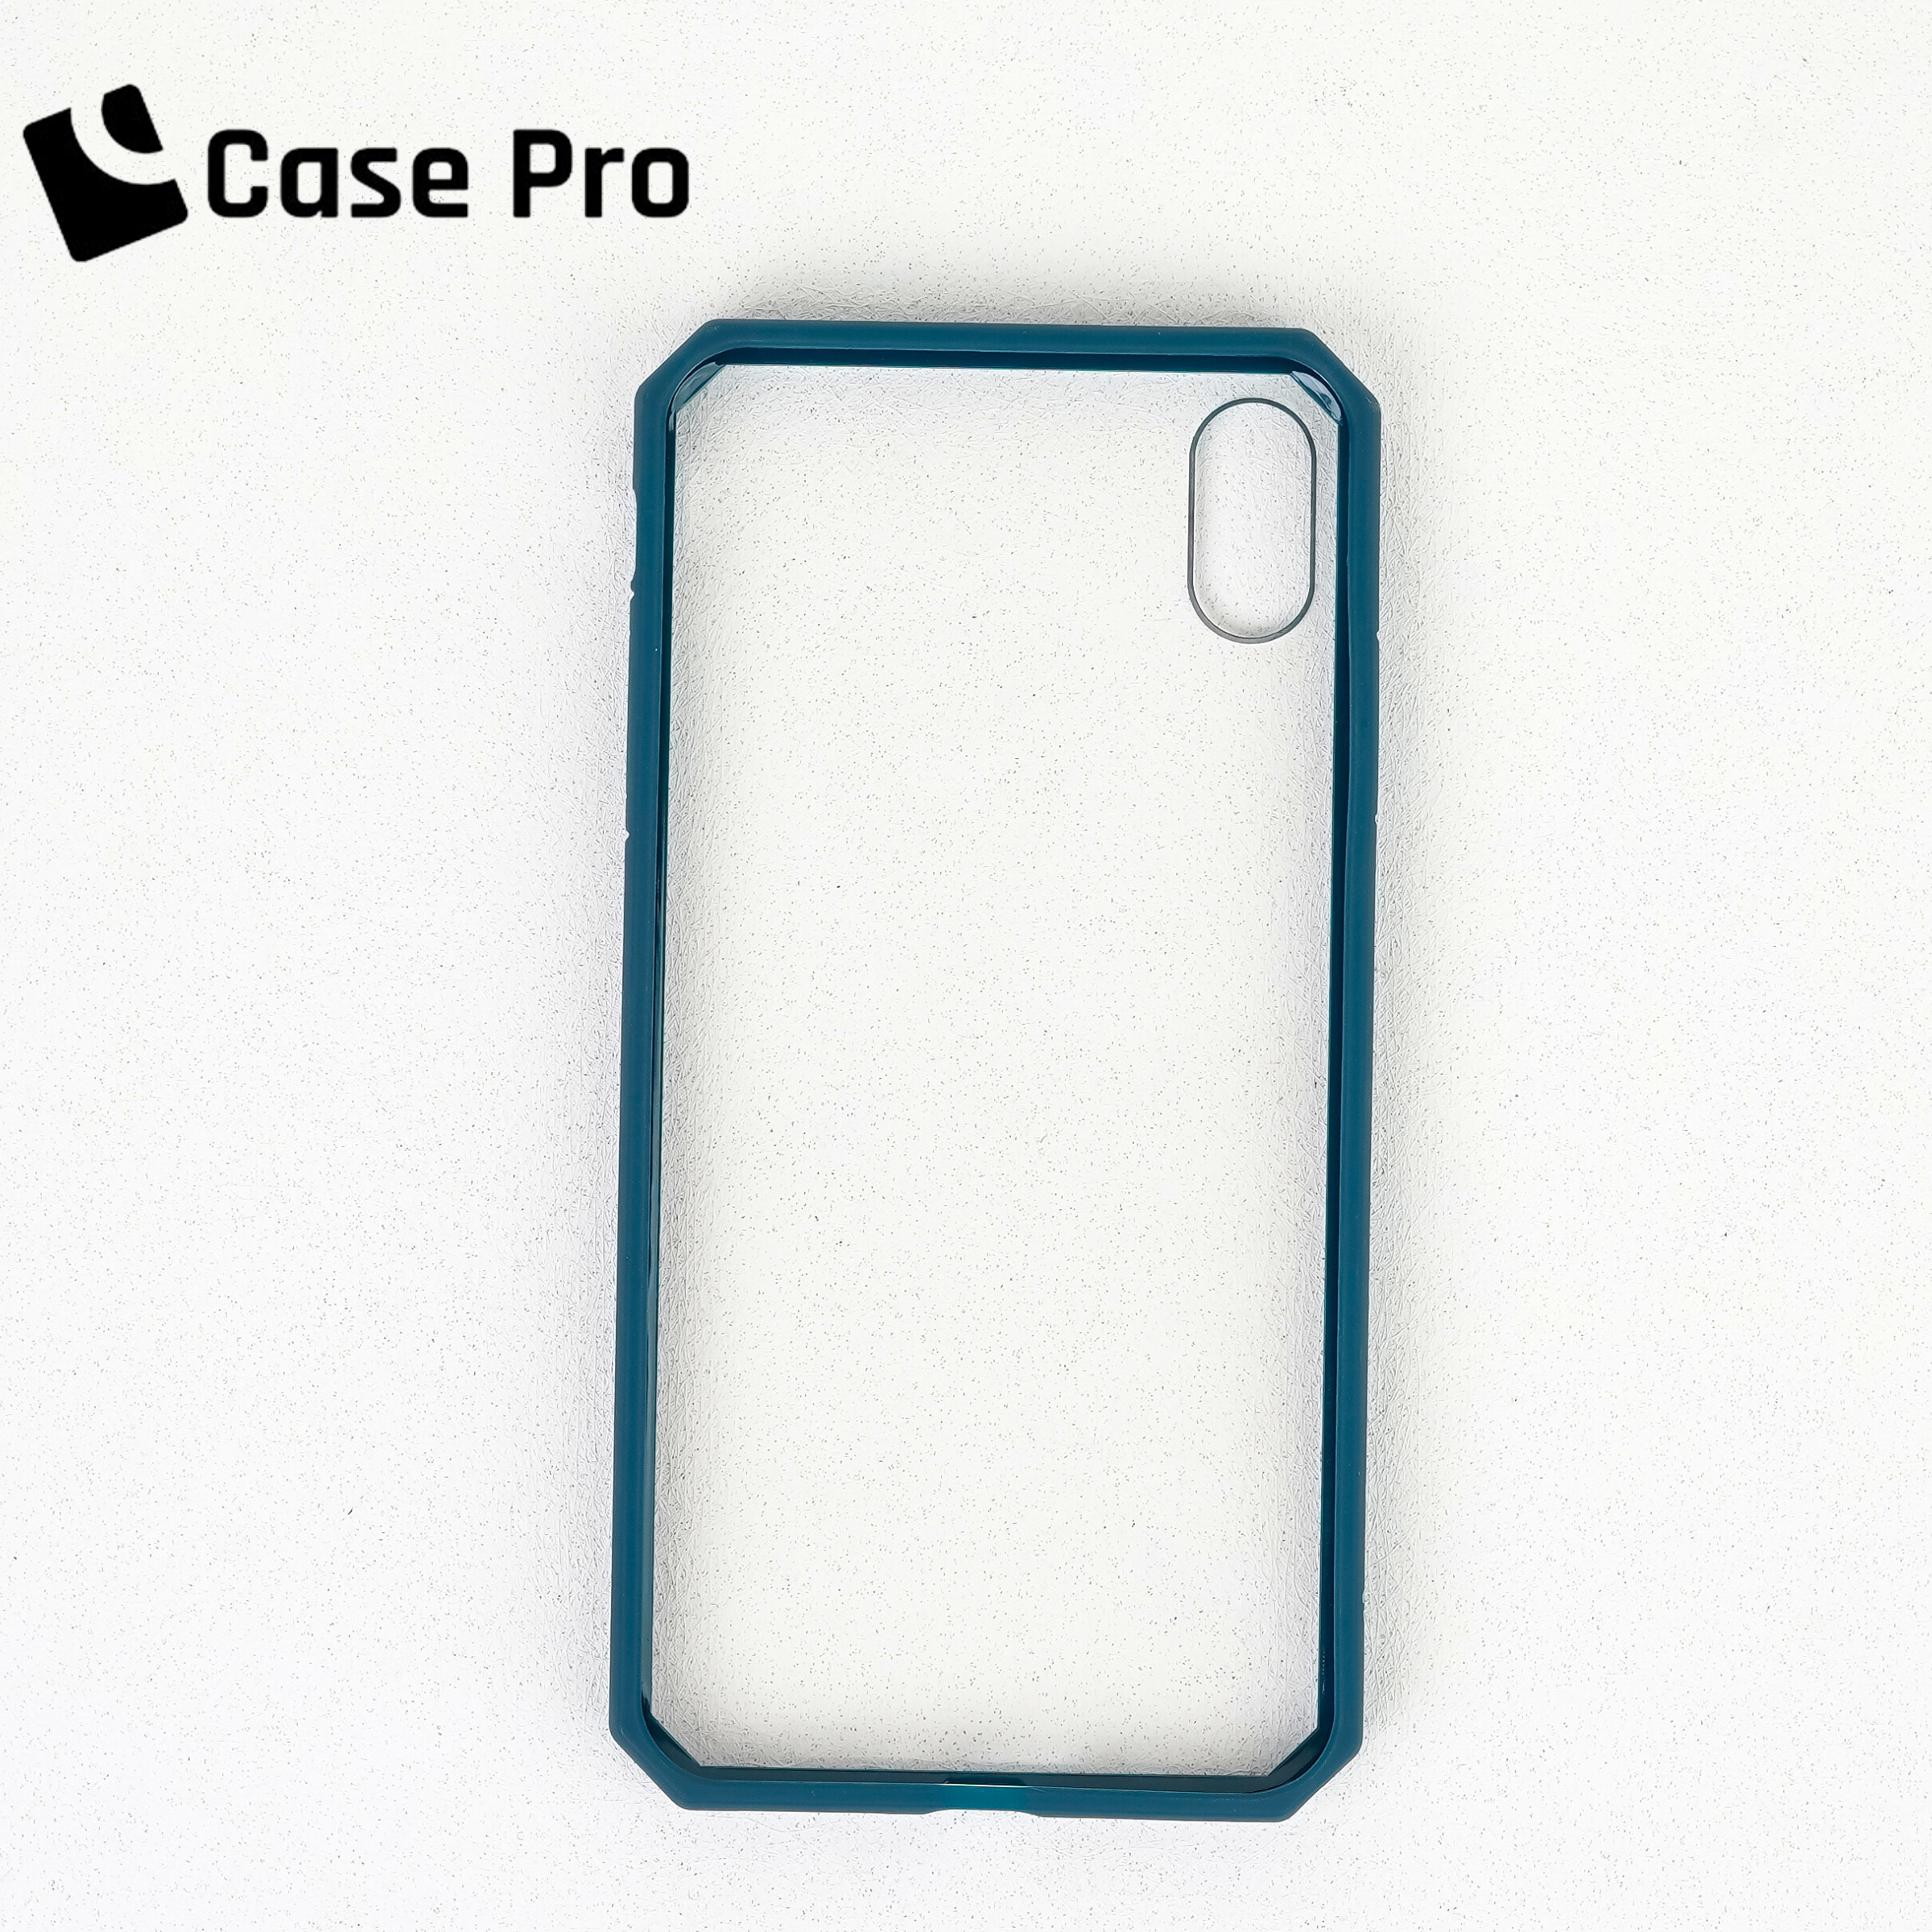 CASE PRO IMPACT PROTECTION CASE FOR IPH XS MAX (6.5")